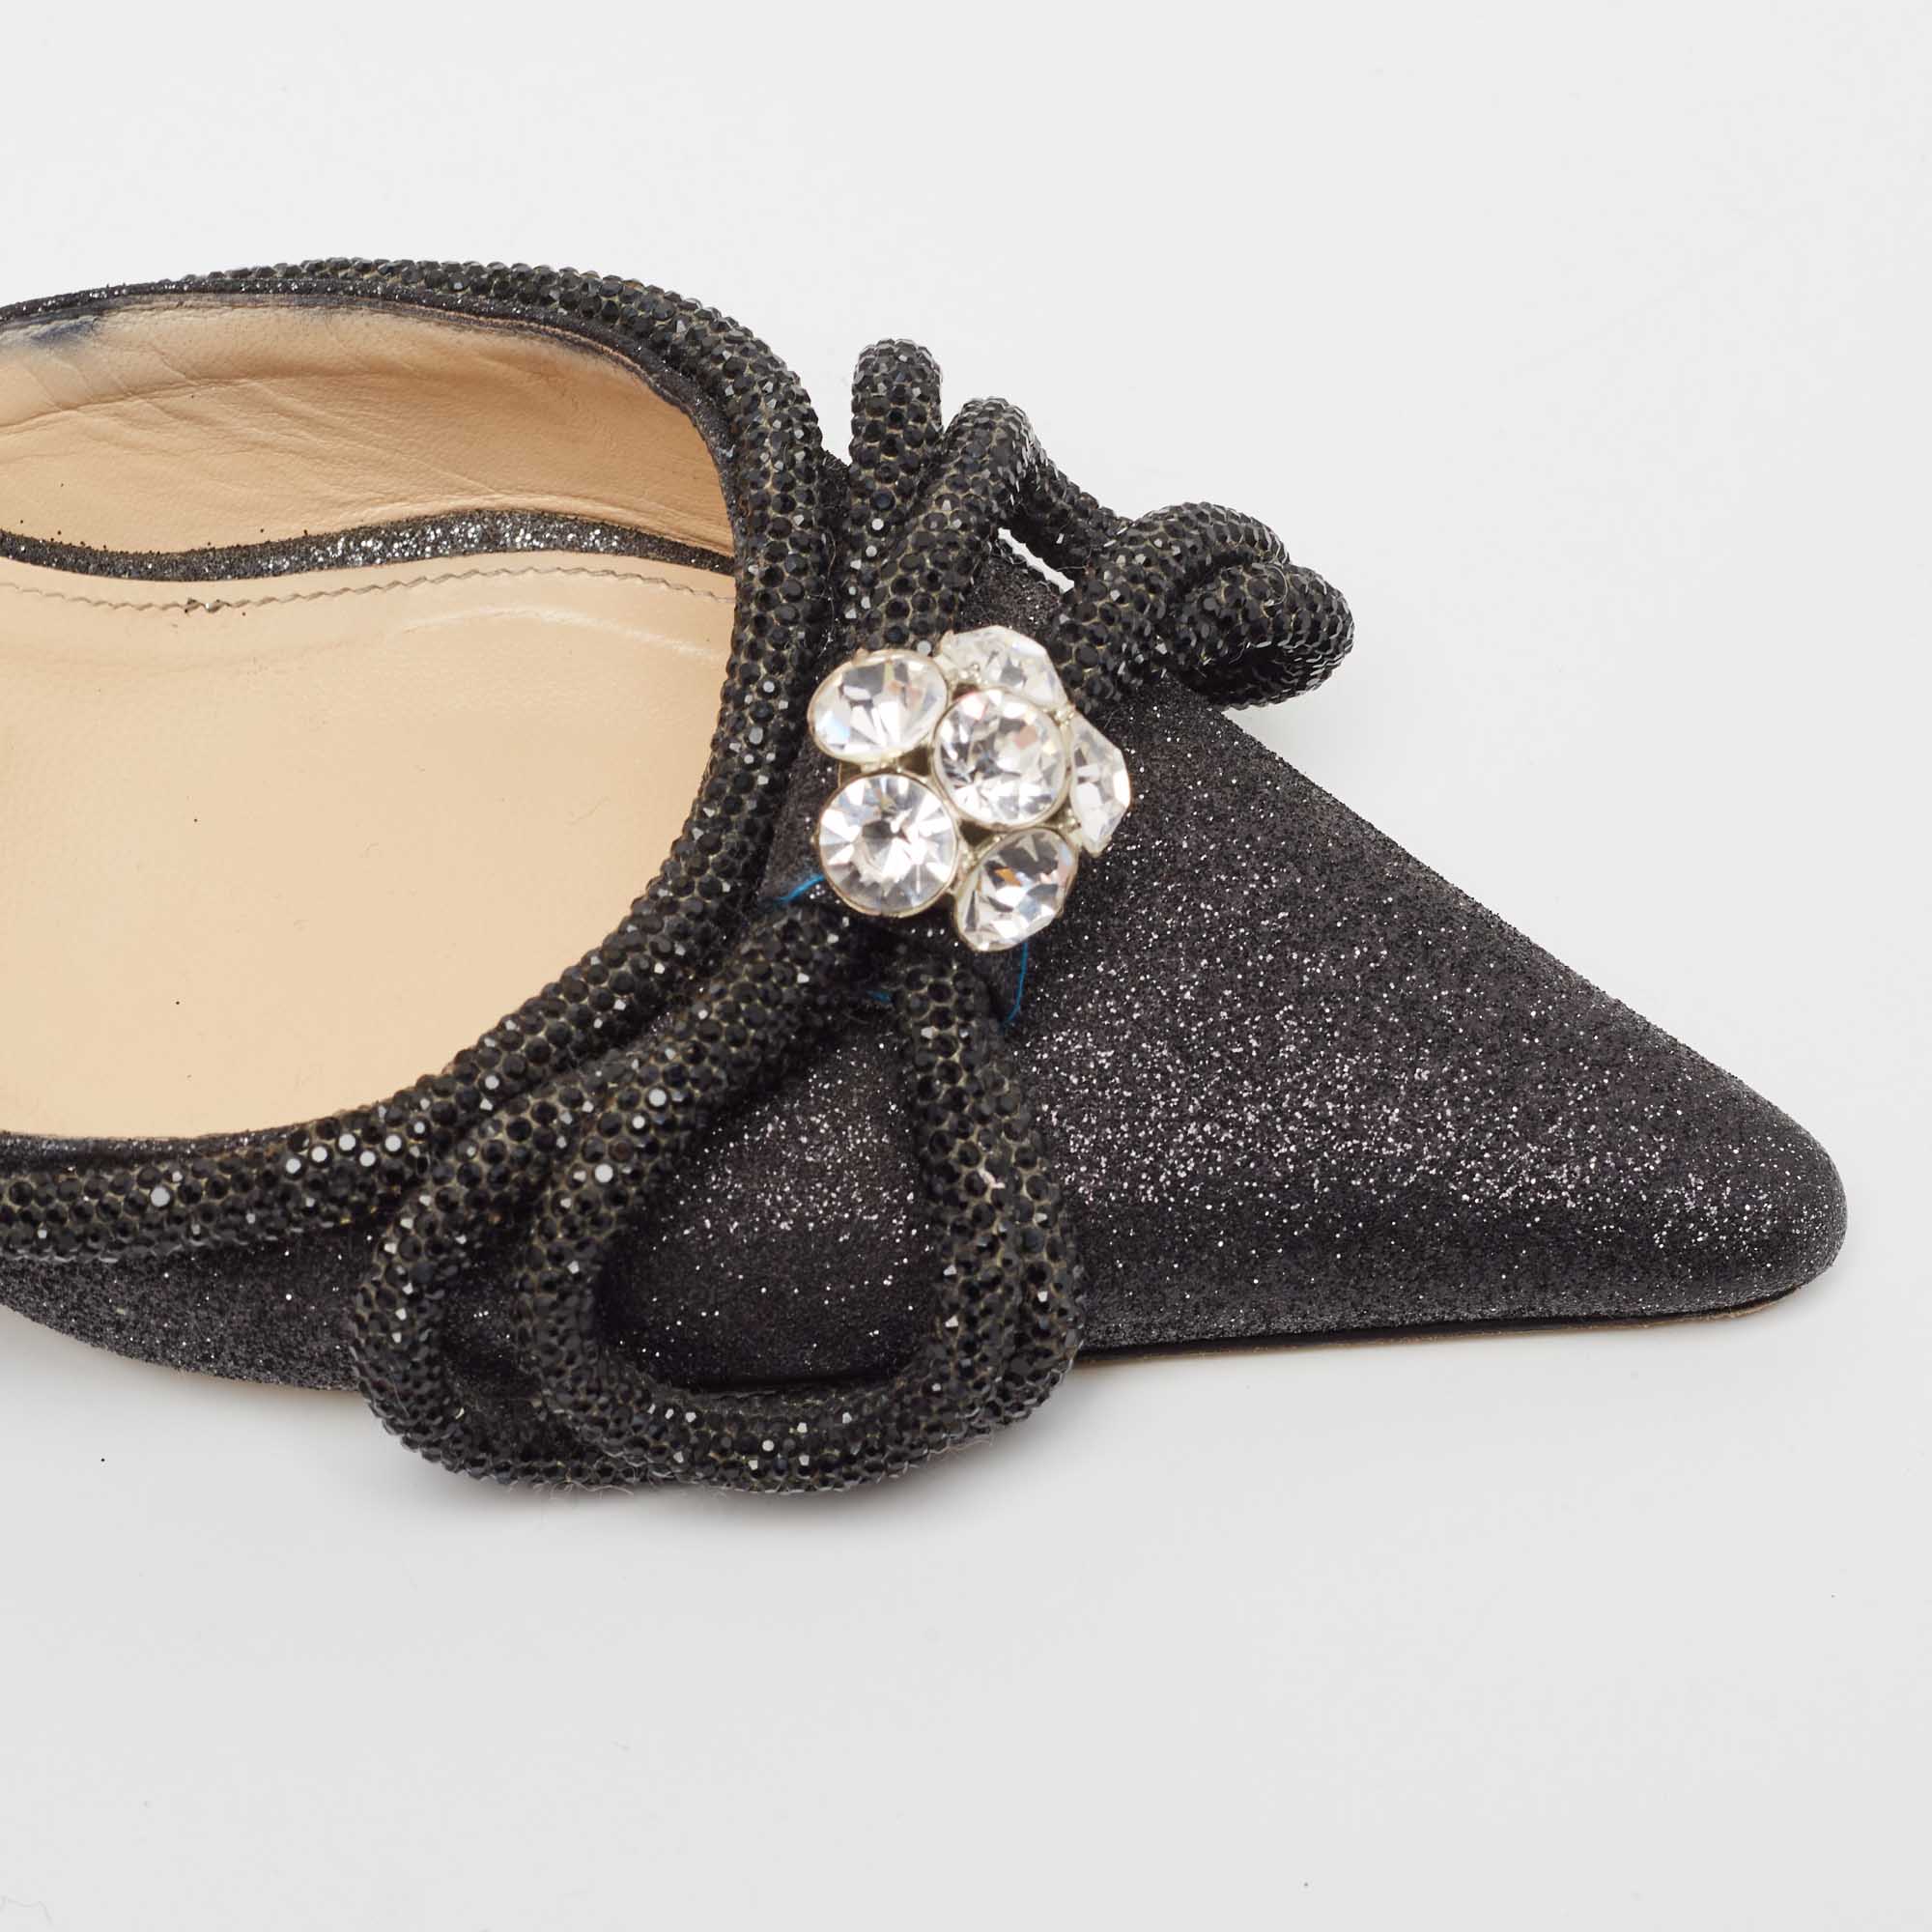 Mach & Mach Black Glitter Crystal Embellished Double Bow Mules Size 39